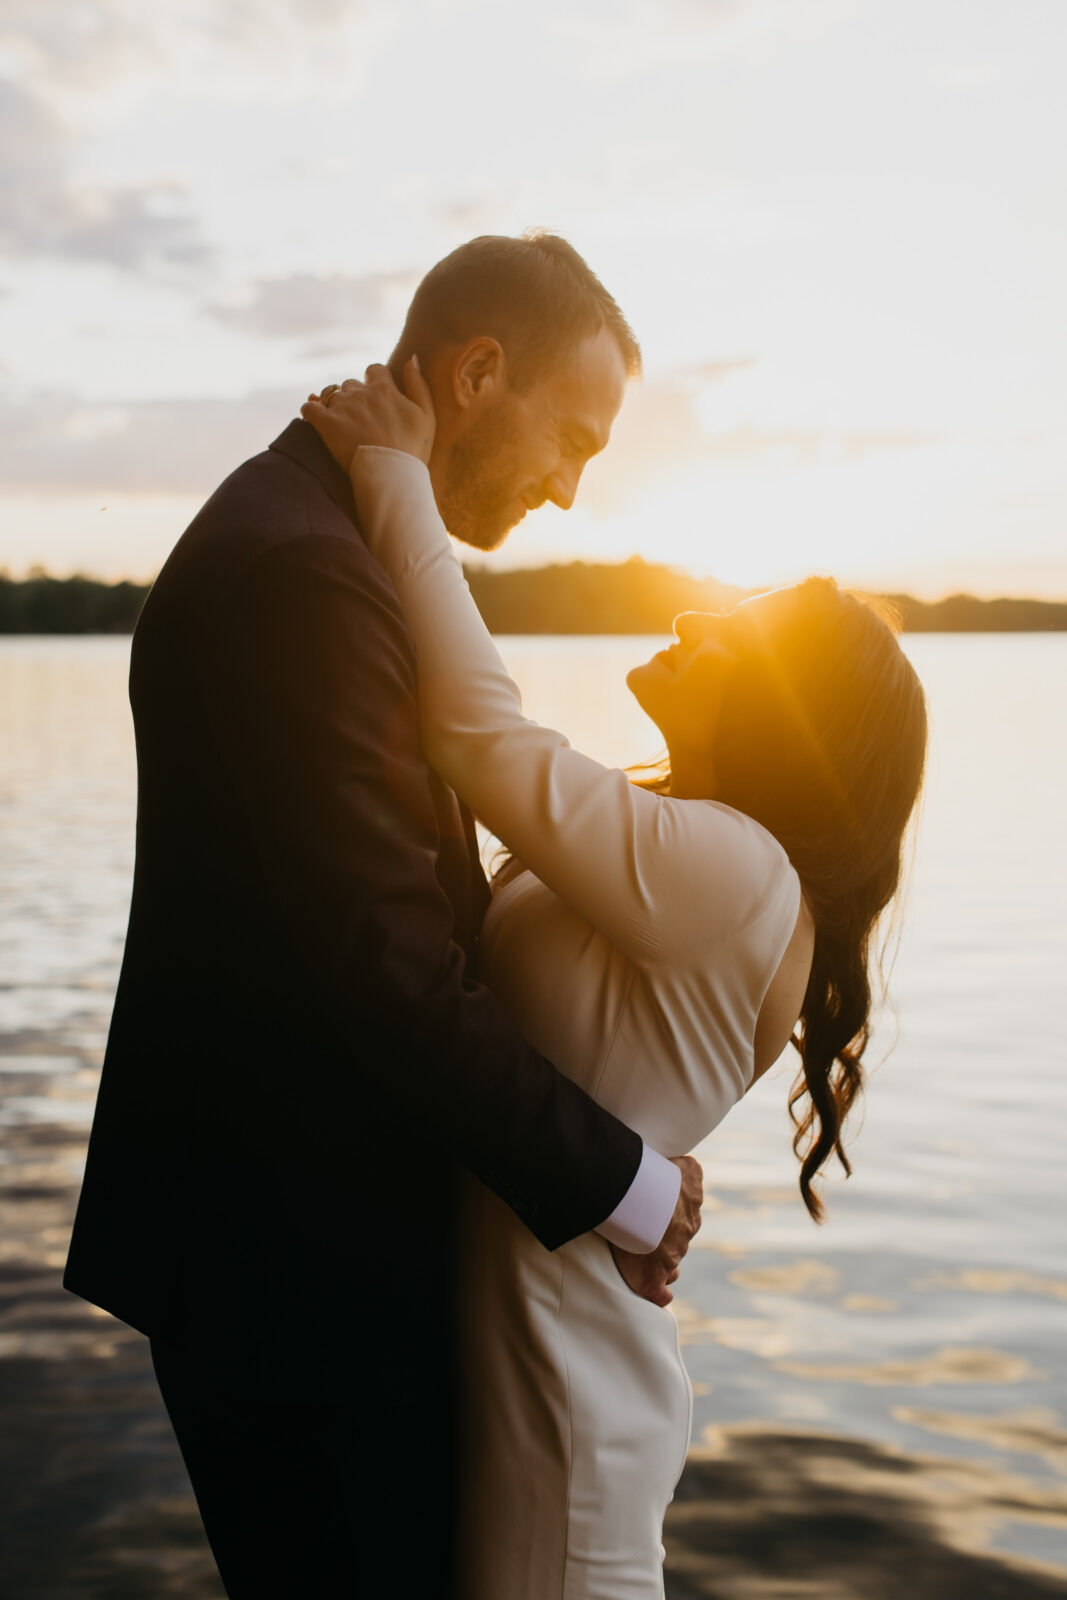 A lovely photo of the bride and groom  during a sunset on their wedding day